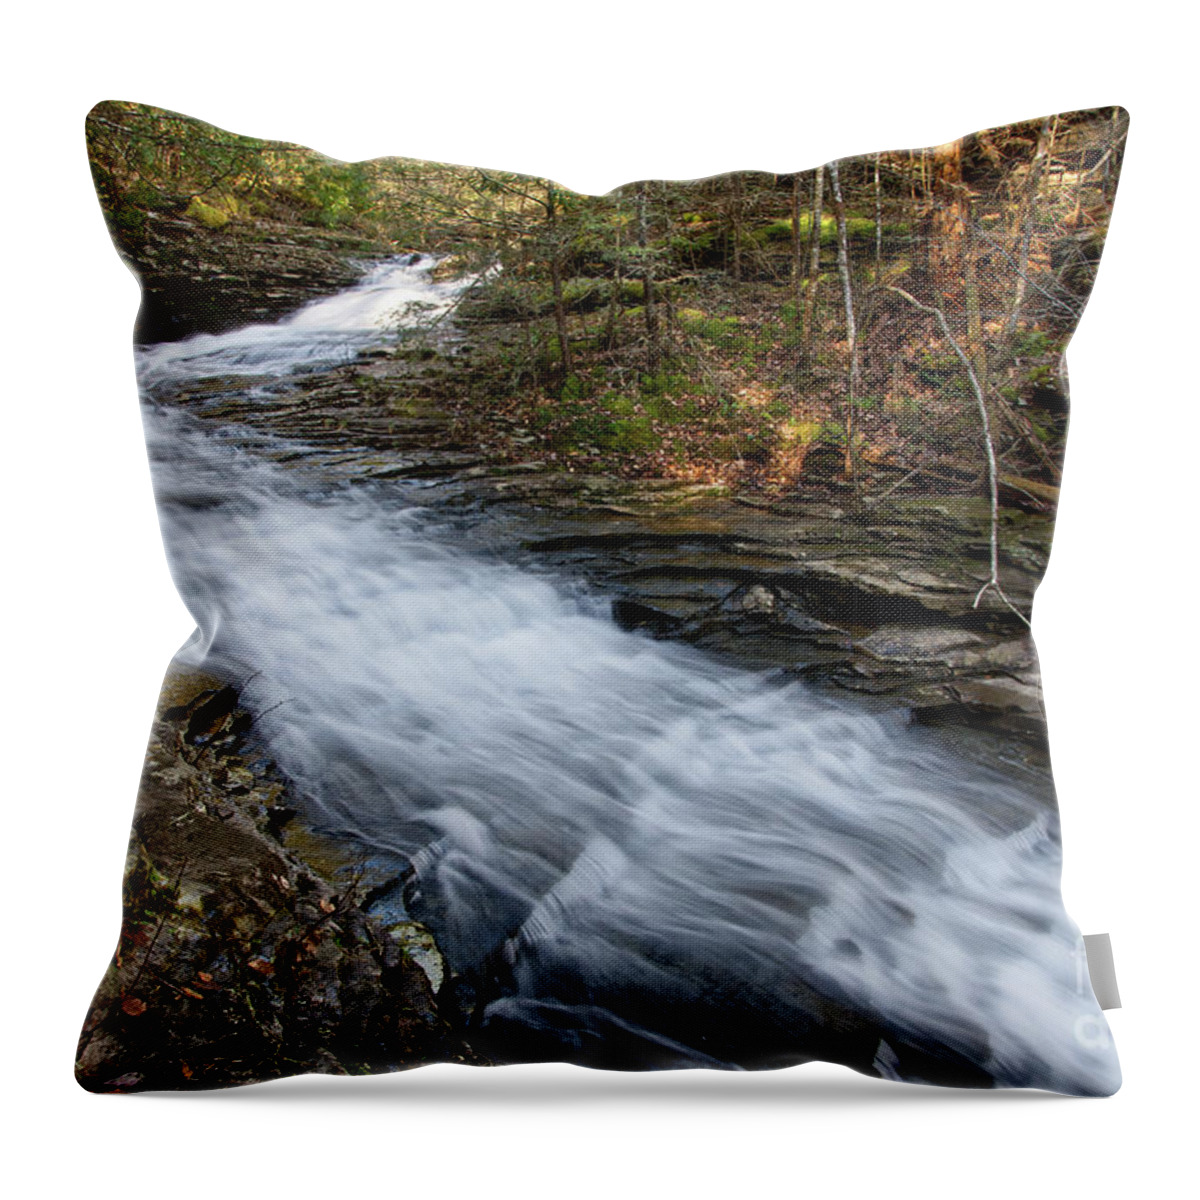 Hike Throw Pillow featuring the photograph Rushing Water #4 by Phil Perkins